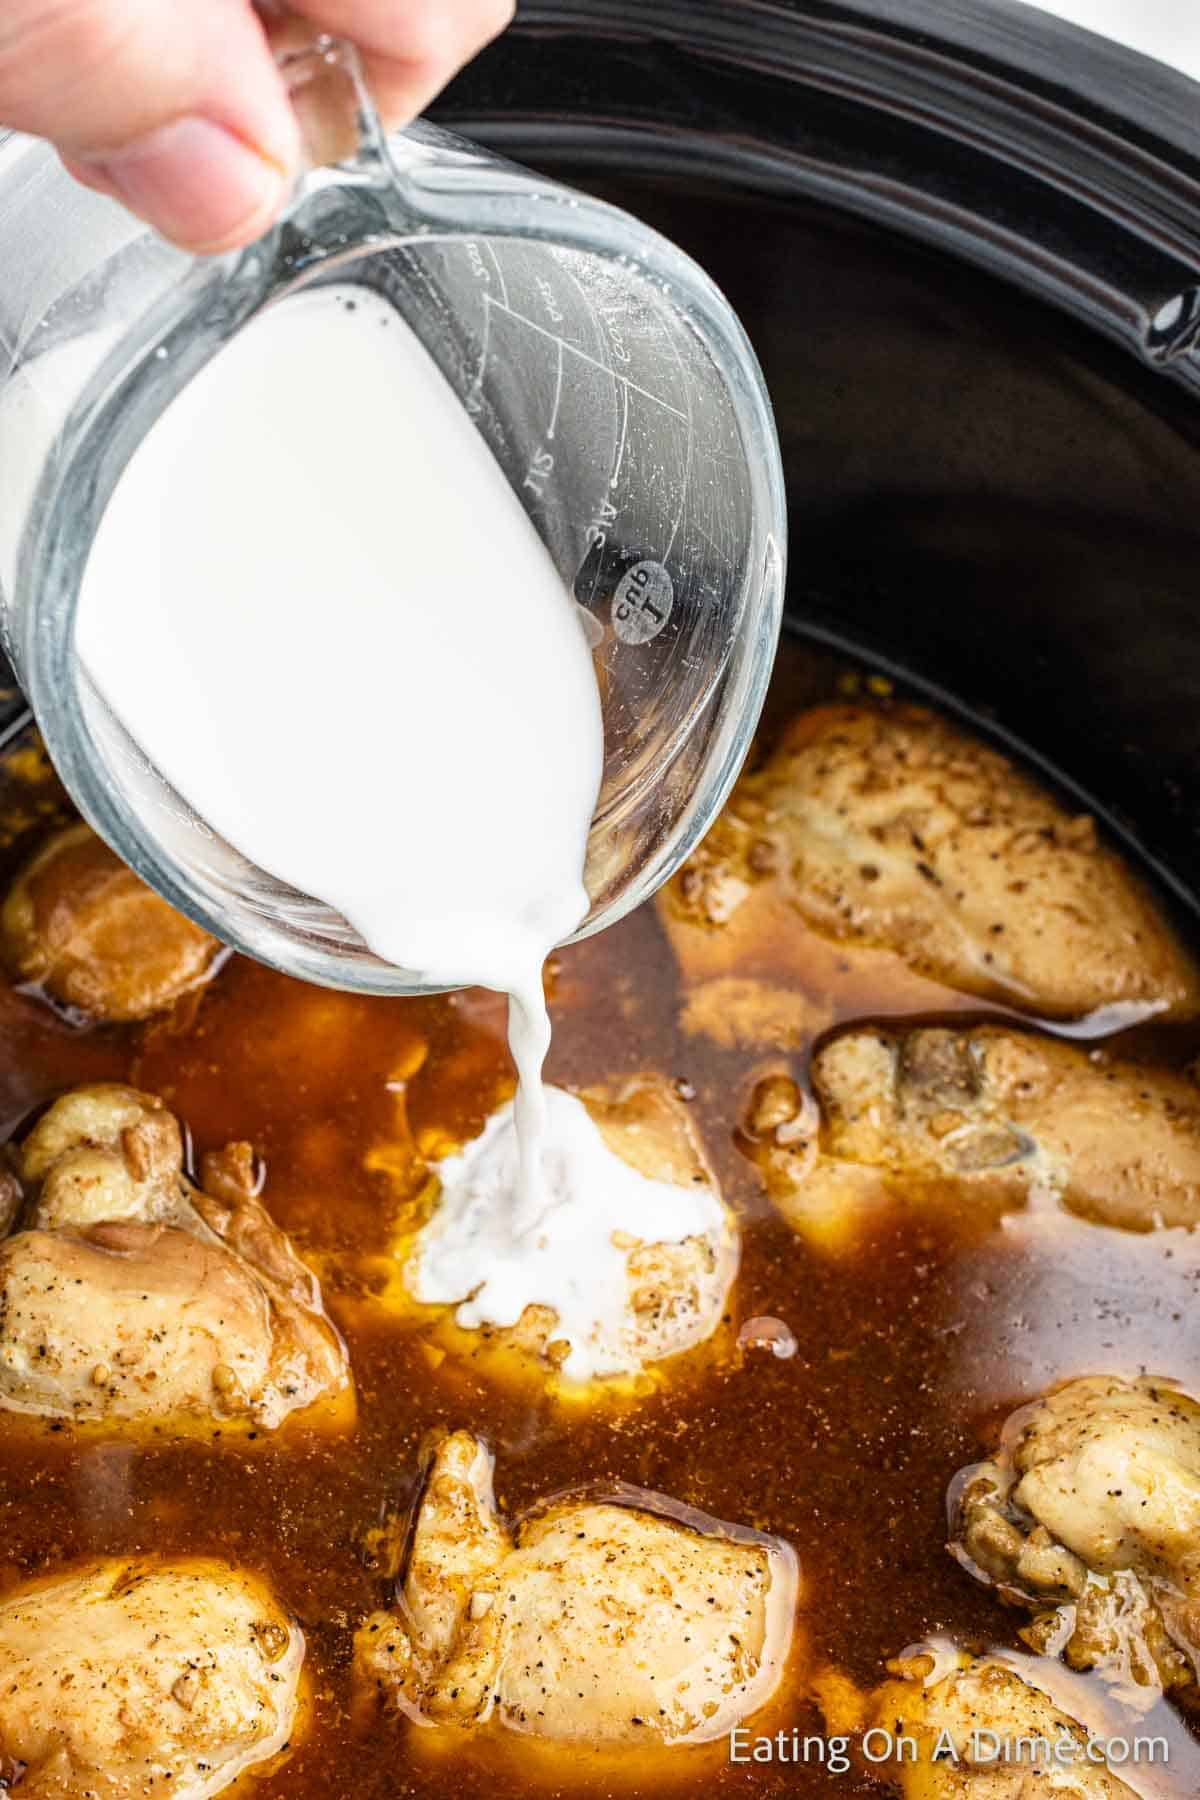 Pouring the heavy cream over the chicken thighs in sauce in the slow cooker